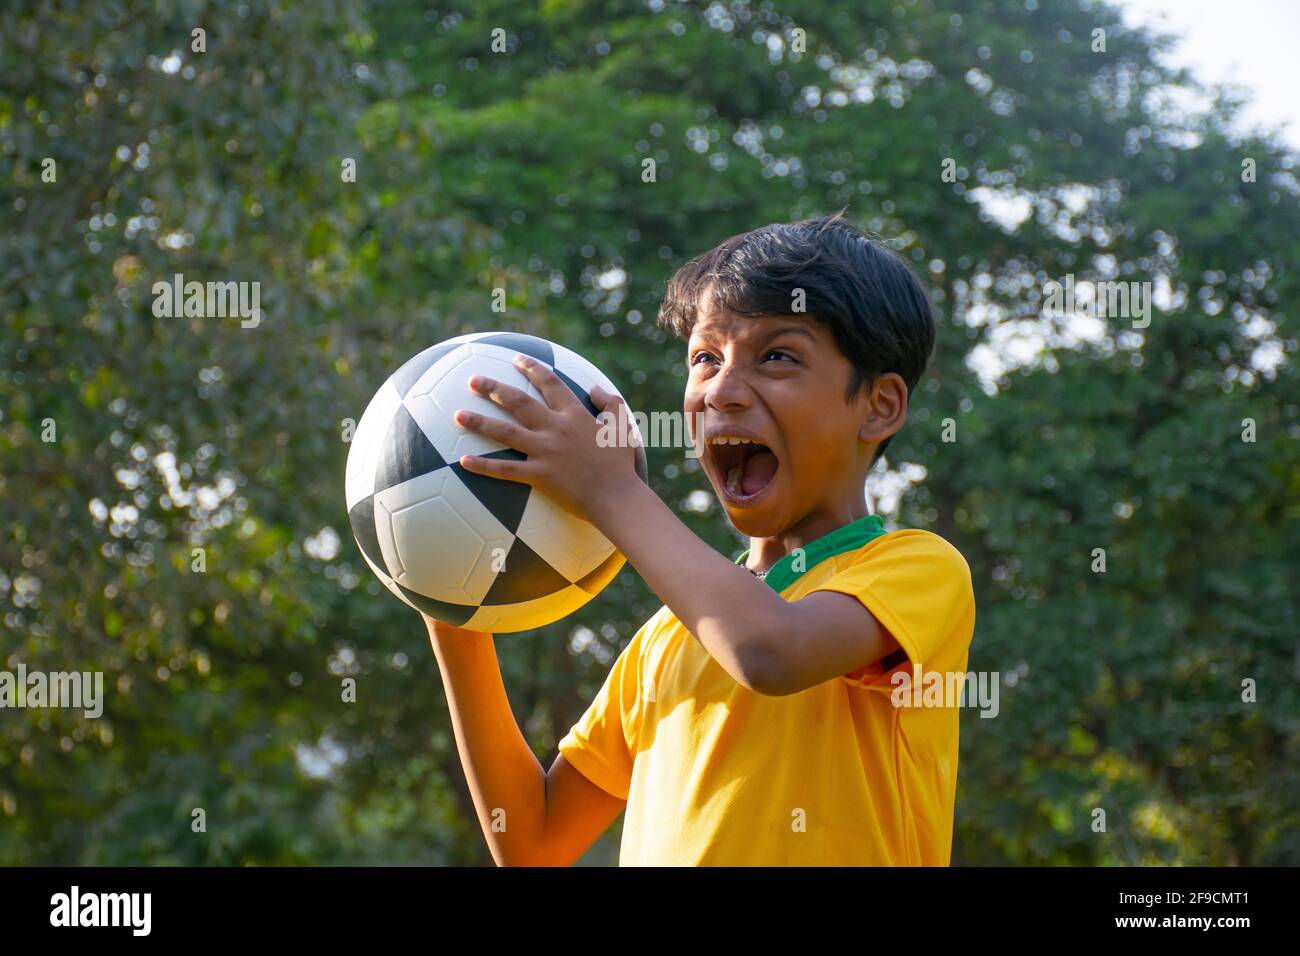 Soccer player shouting on the park Stock Photo